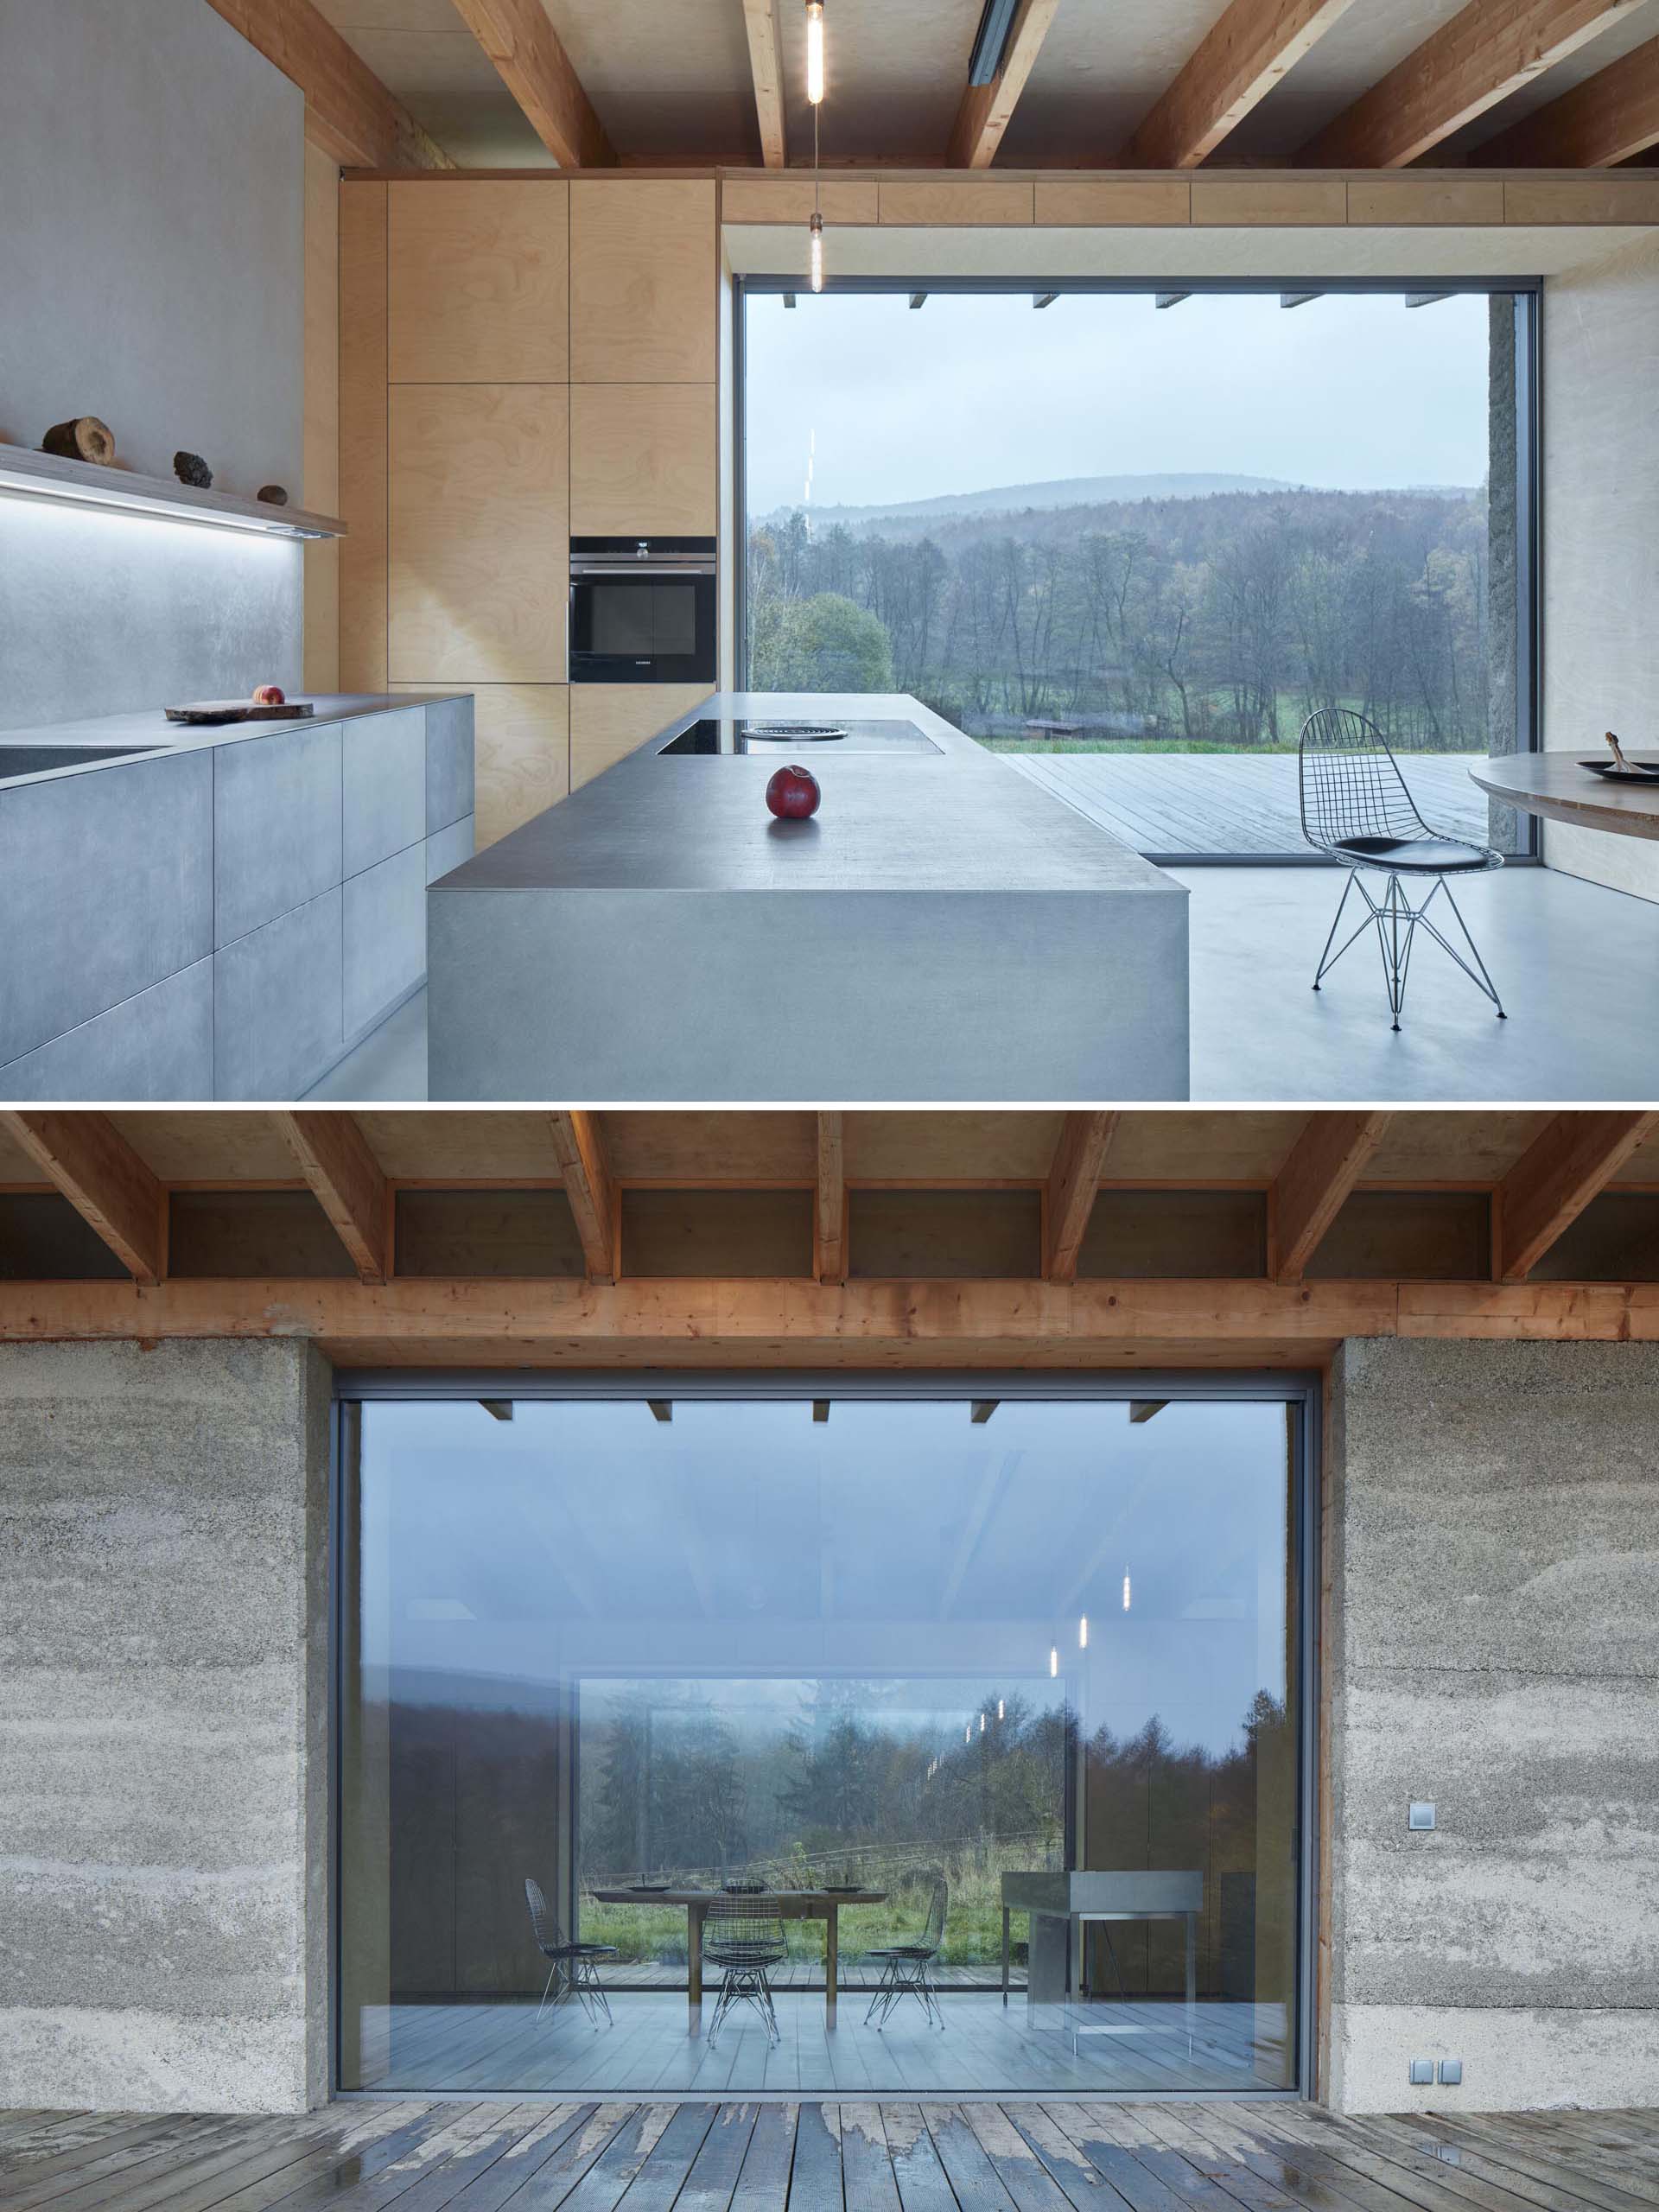 A modern cabin with a stainless steel kitchen and plywood walls.